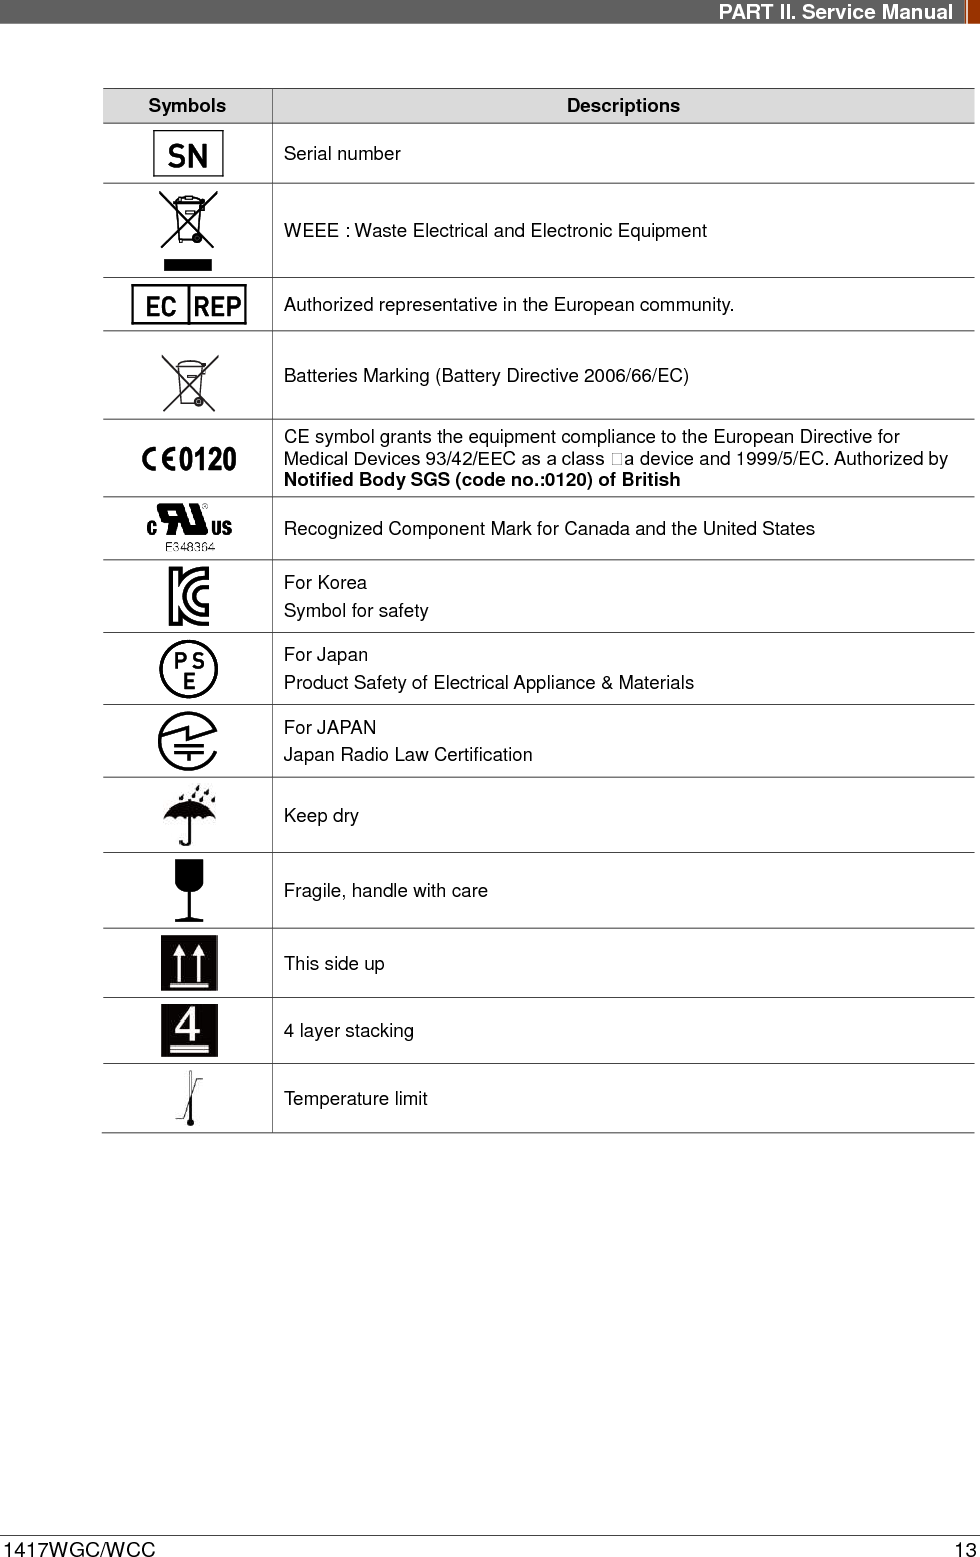 PART II. Service Manual  1417WGC/WCC 13 Symbols Descriptions  Serial number  WEEE : Waste Electrical and Electronic Equipment  Authorized representative in the European community.  Batteries Marking (Battery Directive 2006/66/EC)  CE symbol grants the equipment compliance to the European Directive for Medical Devices 93/42/EEC as a class �a device and 1999/5/EC. Authorized by Notified Body SGS (code no.:0120) of British  Recognized Component Mark for Canada and the United States  For Korea Symbol for safety  For Japan Product Safety of Electrical Appliance &amp; Materials  For JAPAN Japan Radio Law Certification  Keep dry  Fragile, handle with care  This side up  4 layer stacking  Temperature limit        